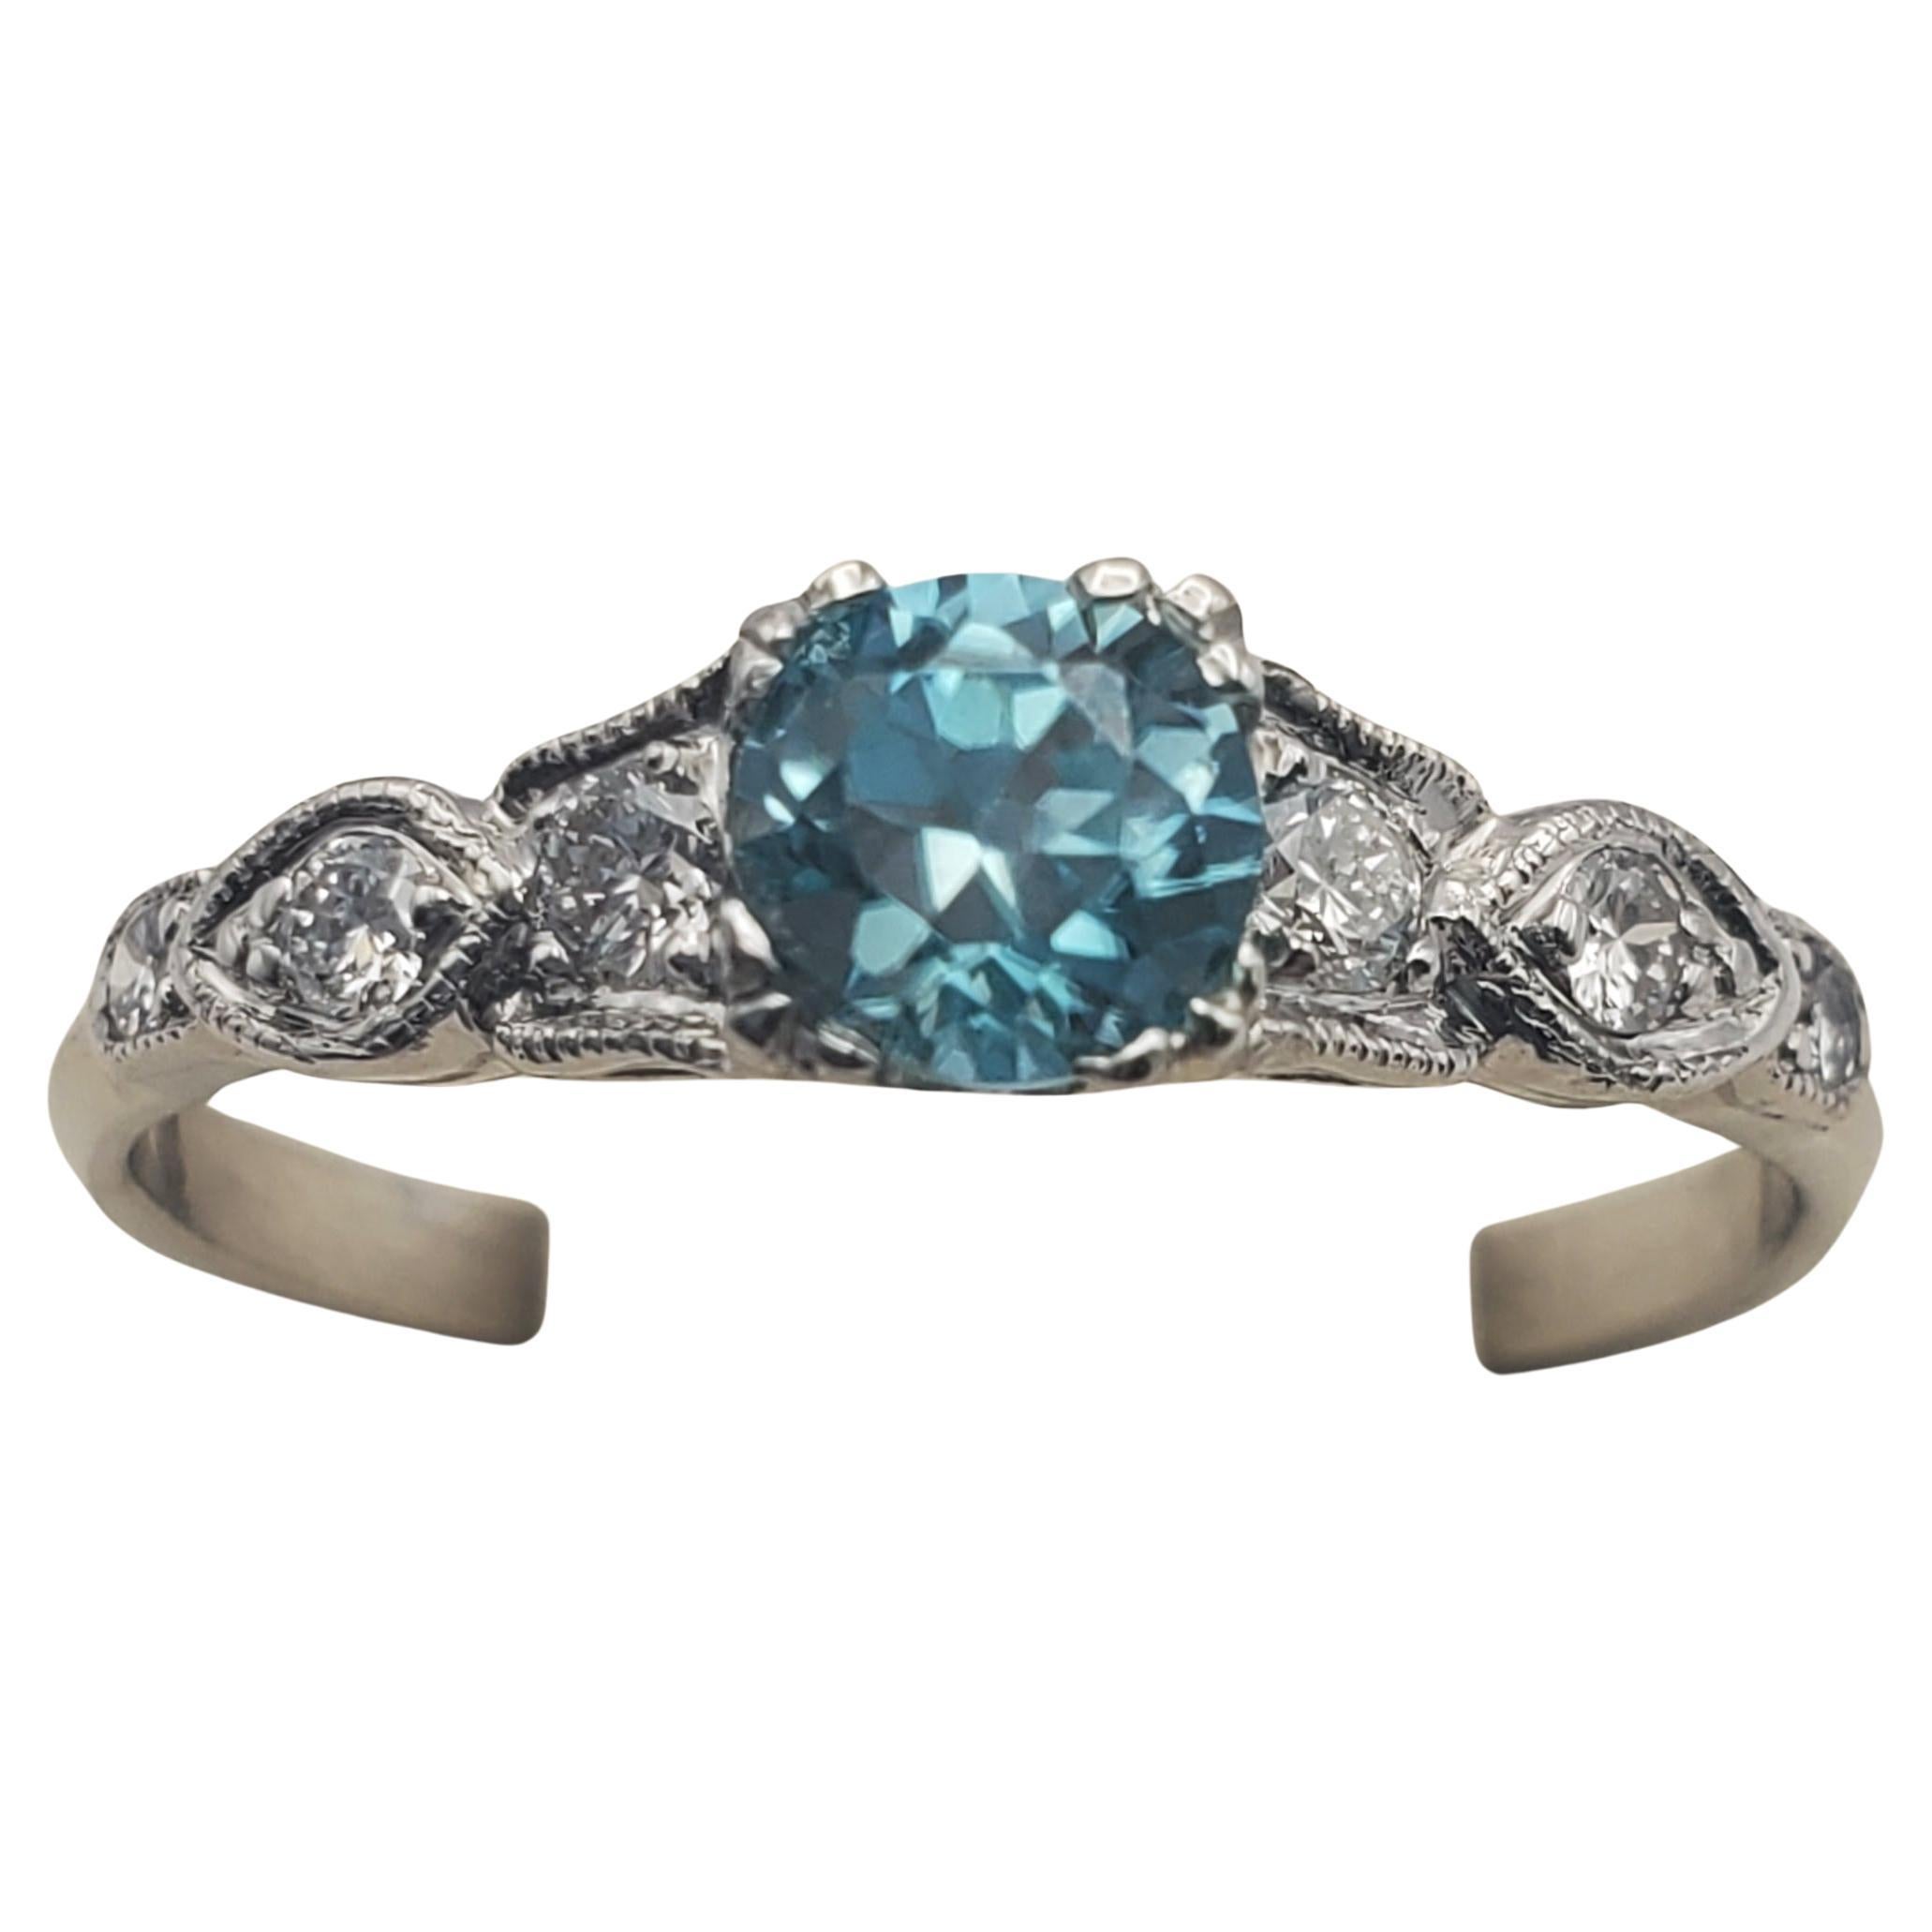 Vibrant 0.73ct Blue Zircon and Diamond Vintage Ring For Sale